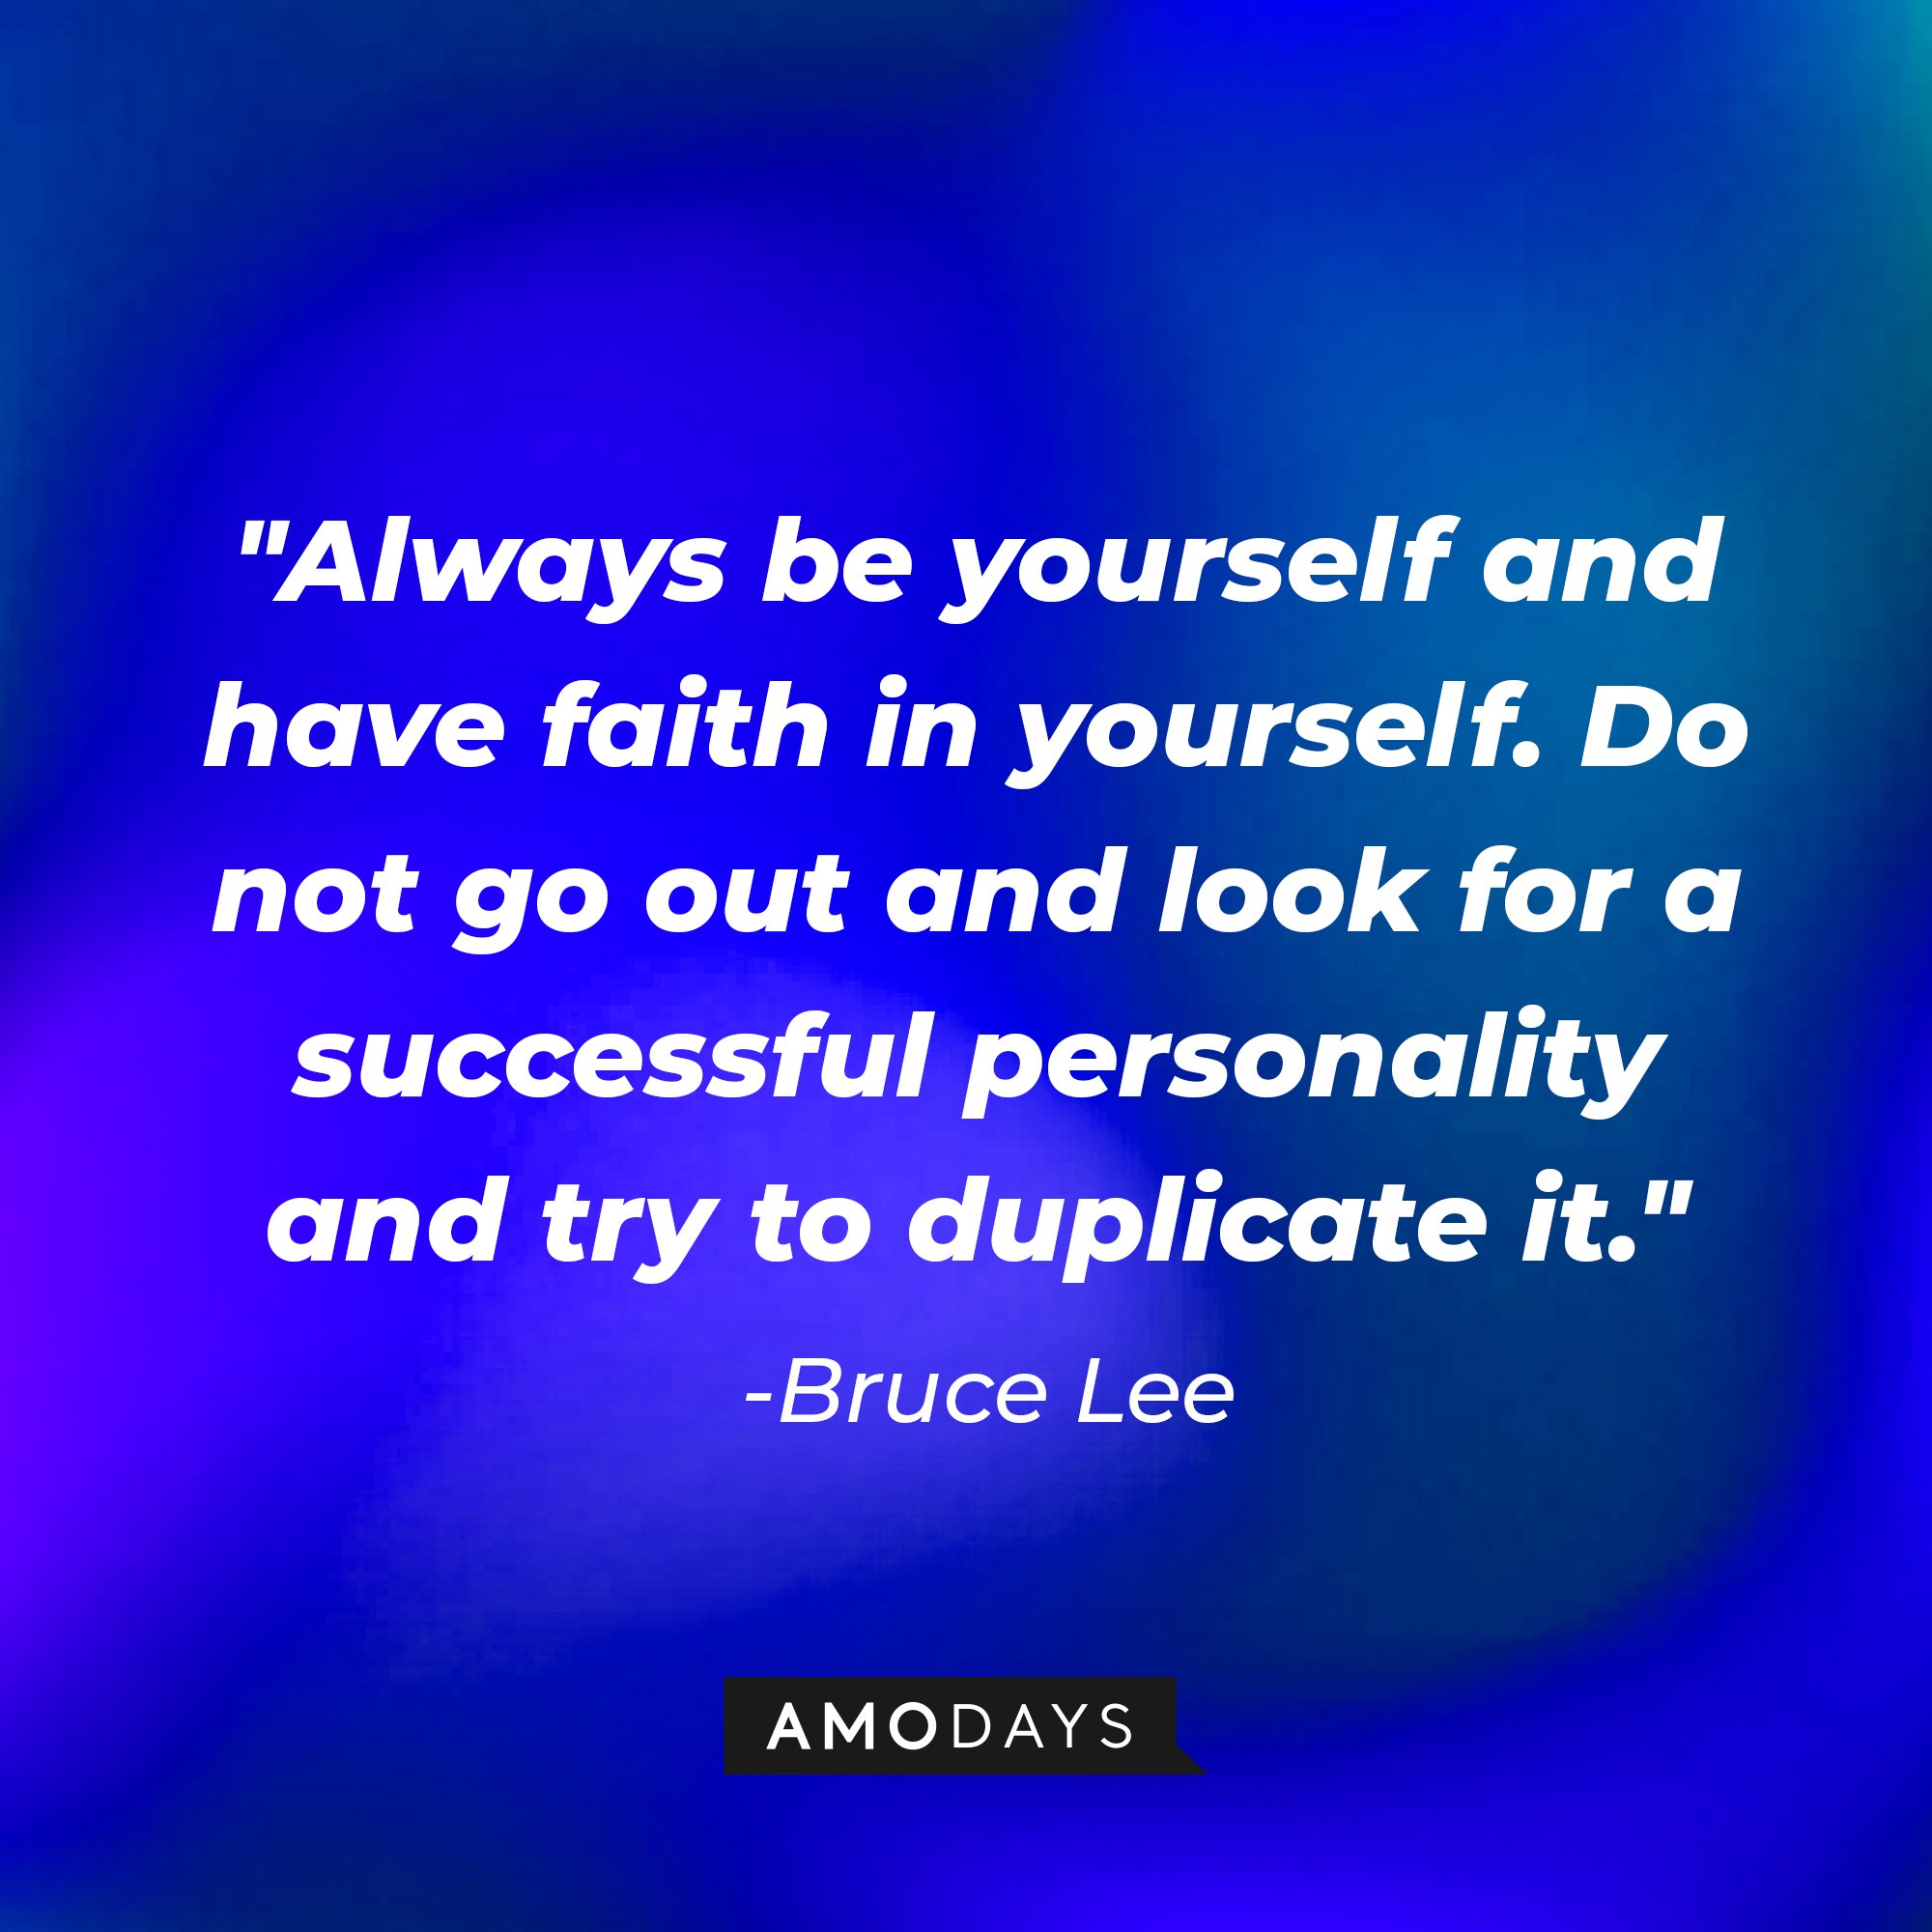 Bruce Lee's quote: "Always be yourself and have faith in yourself. Do not go out and look for a successful personality and try to duplicate it." | Image: AmoDays